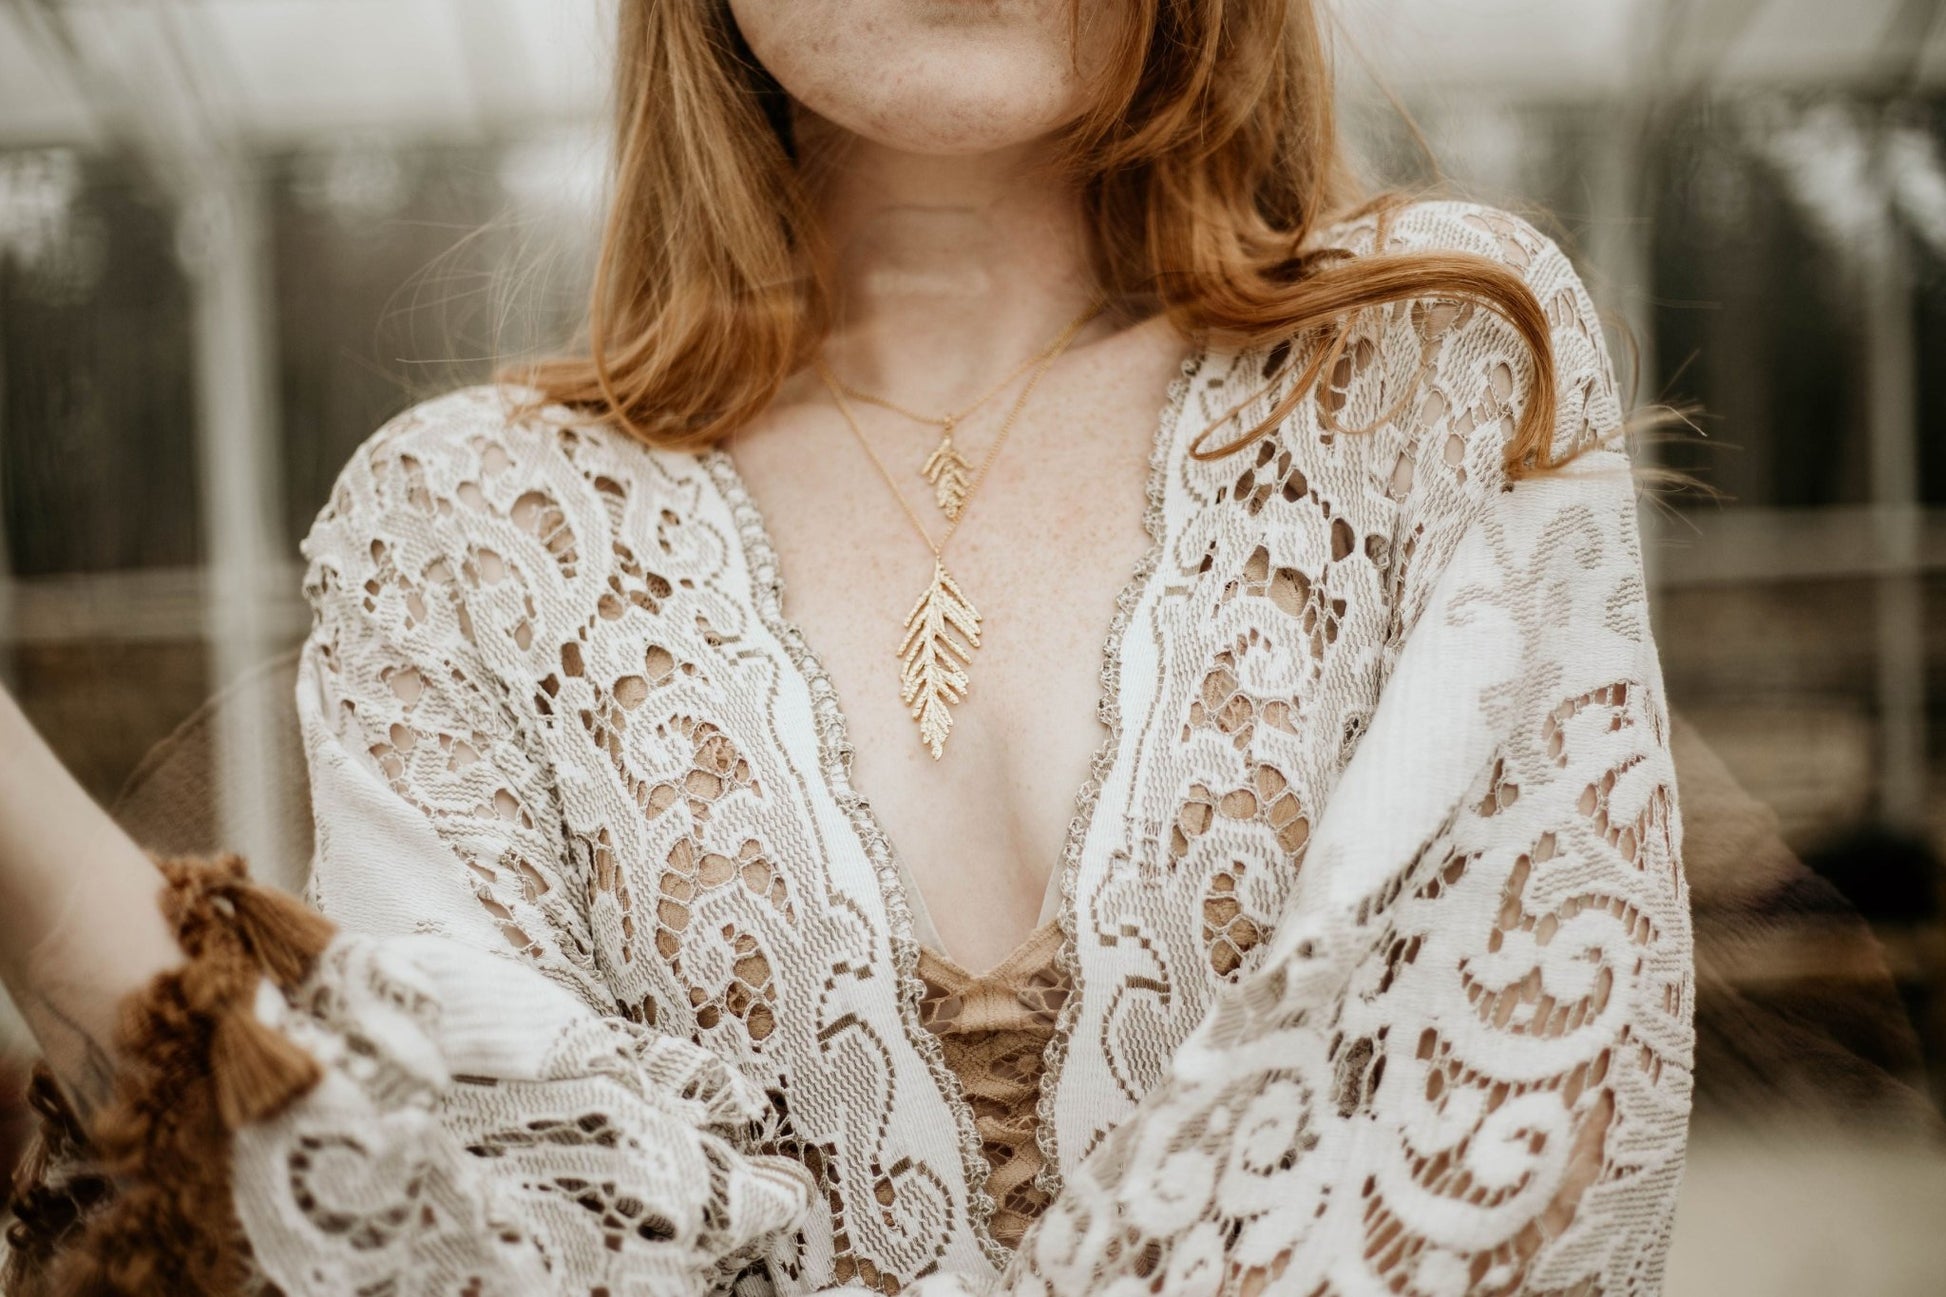 18k plated yellow gold cedar necklace on model wearing lace dress